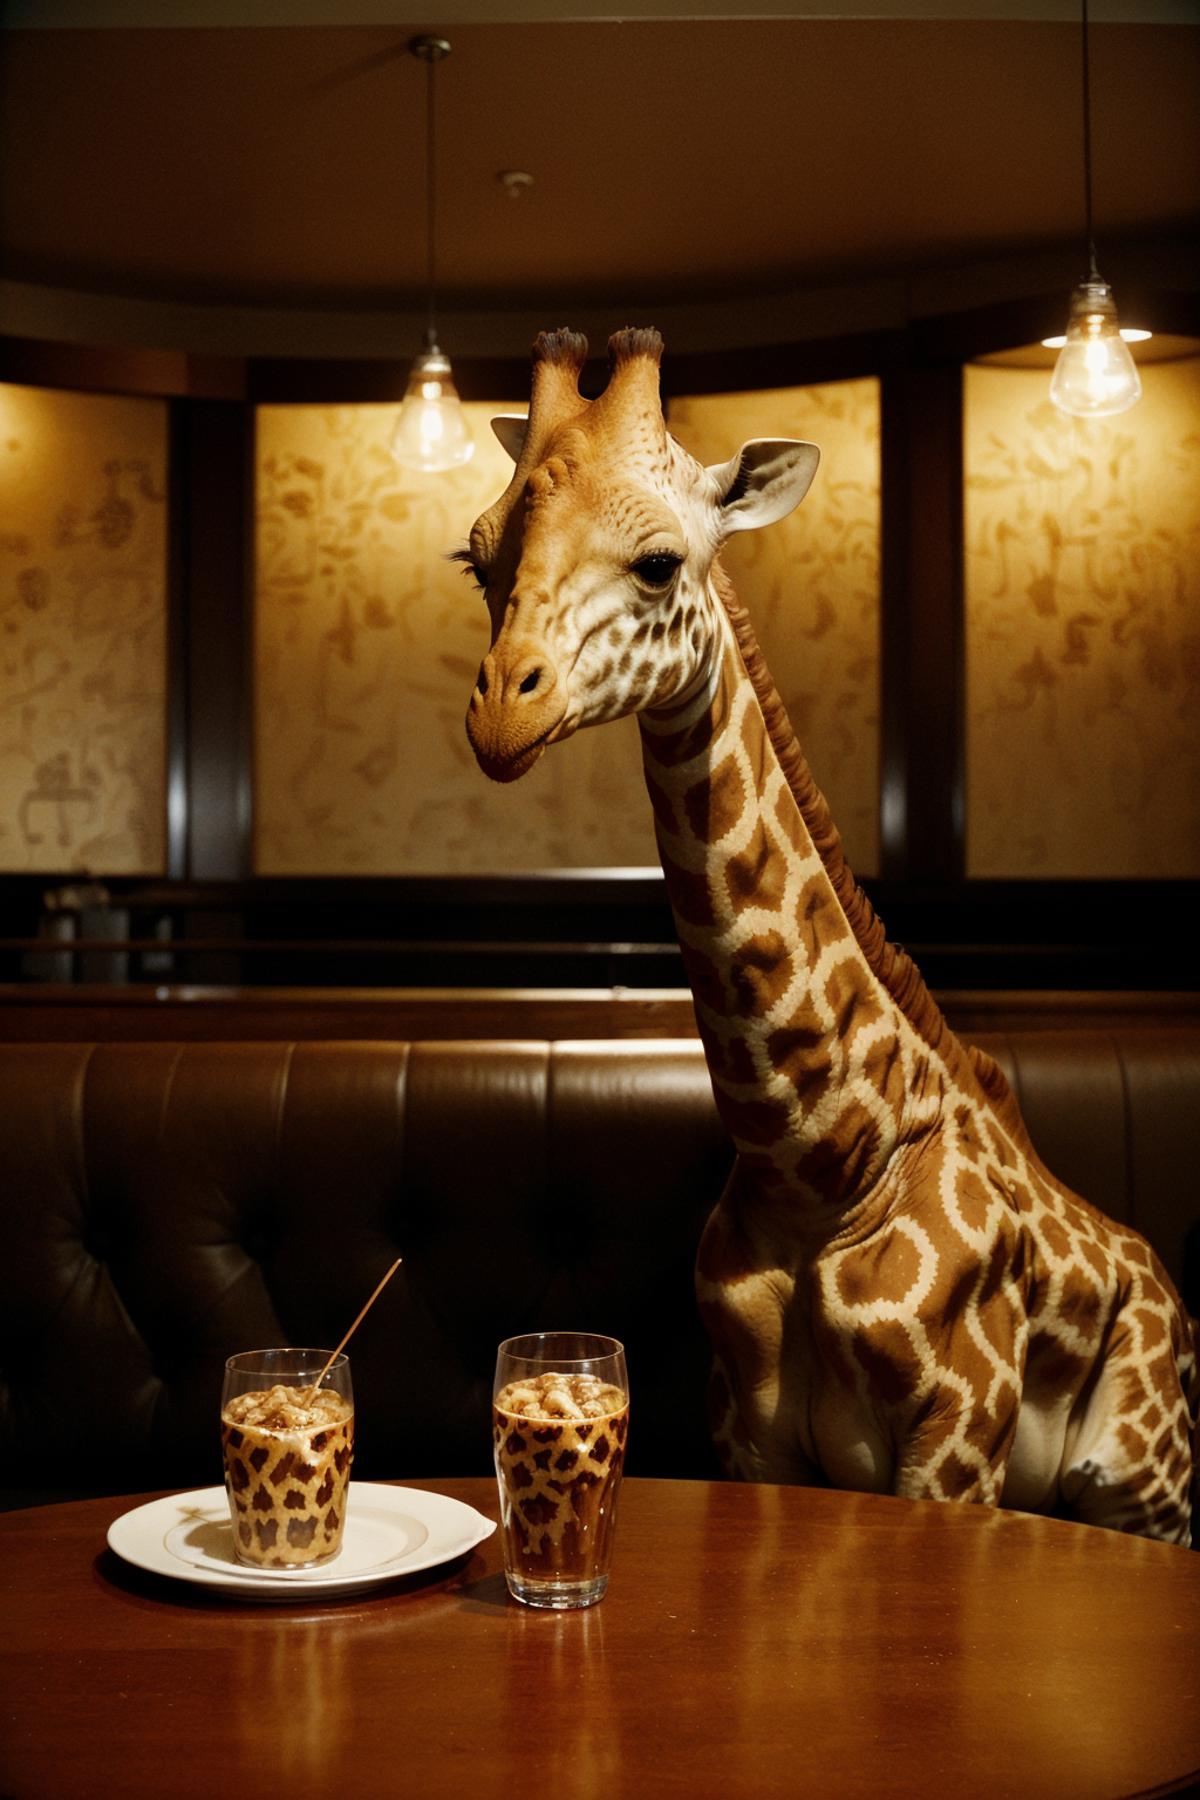 A giraffe standing in a dining room, surrounded by furniture, and looking at two glasses of drinks on a table.